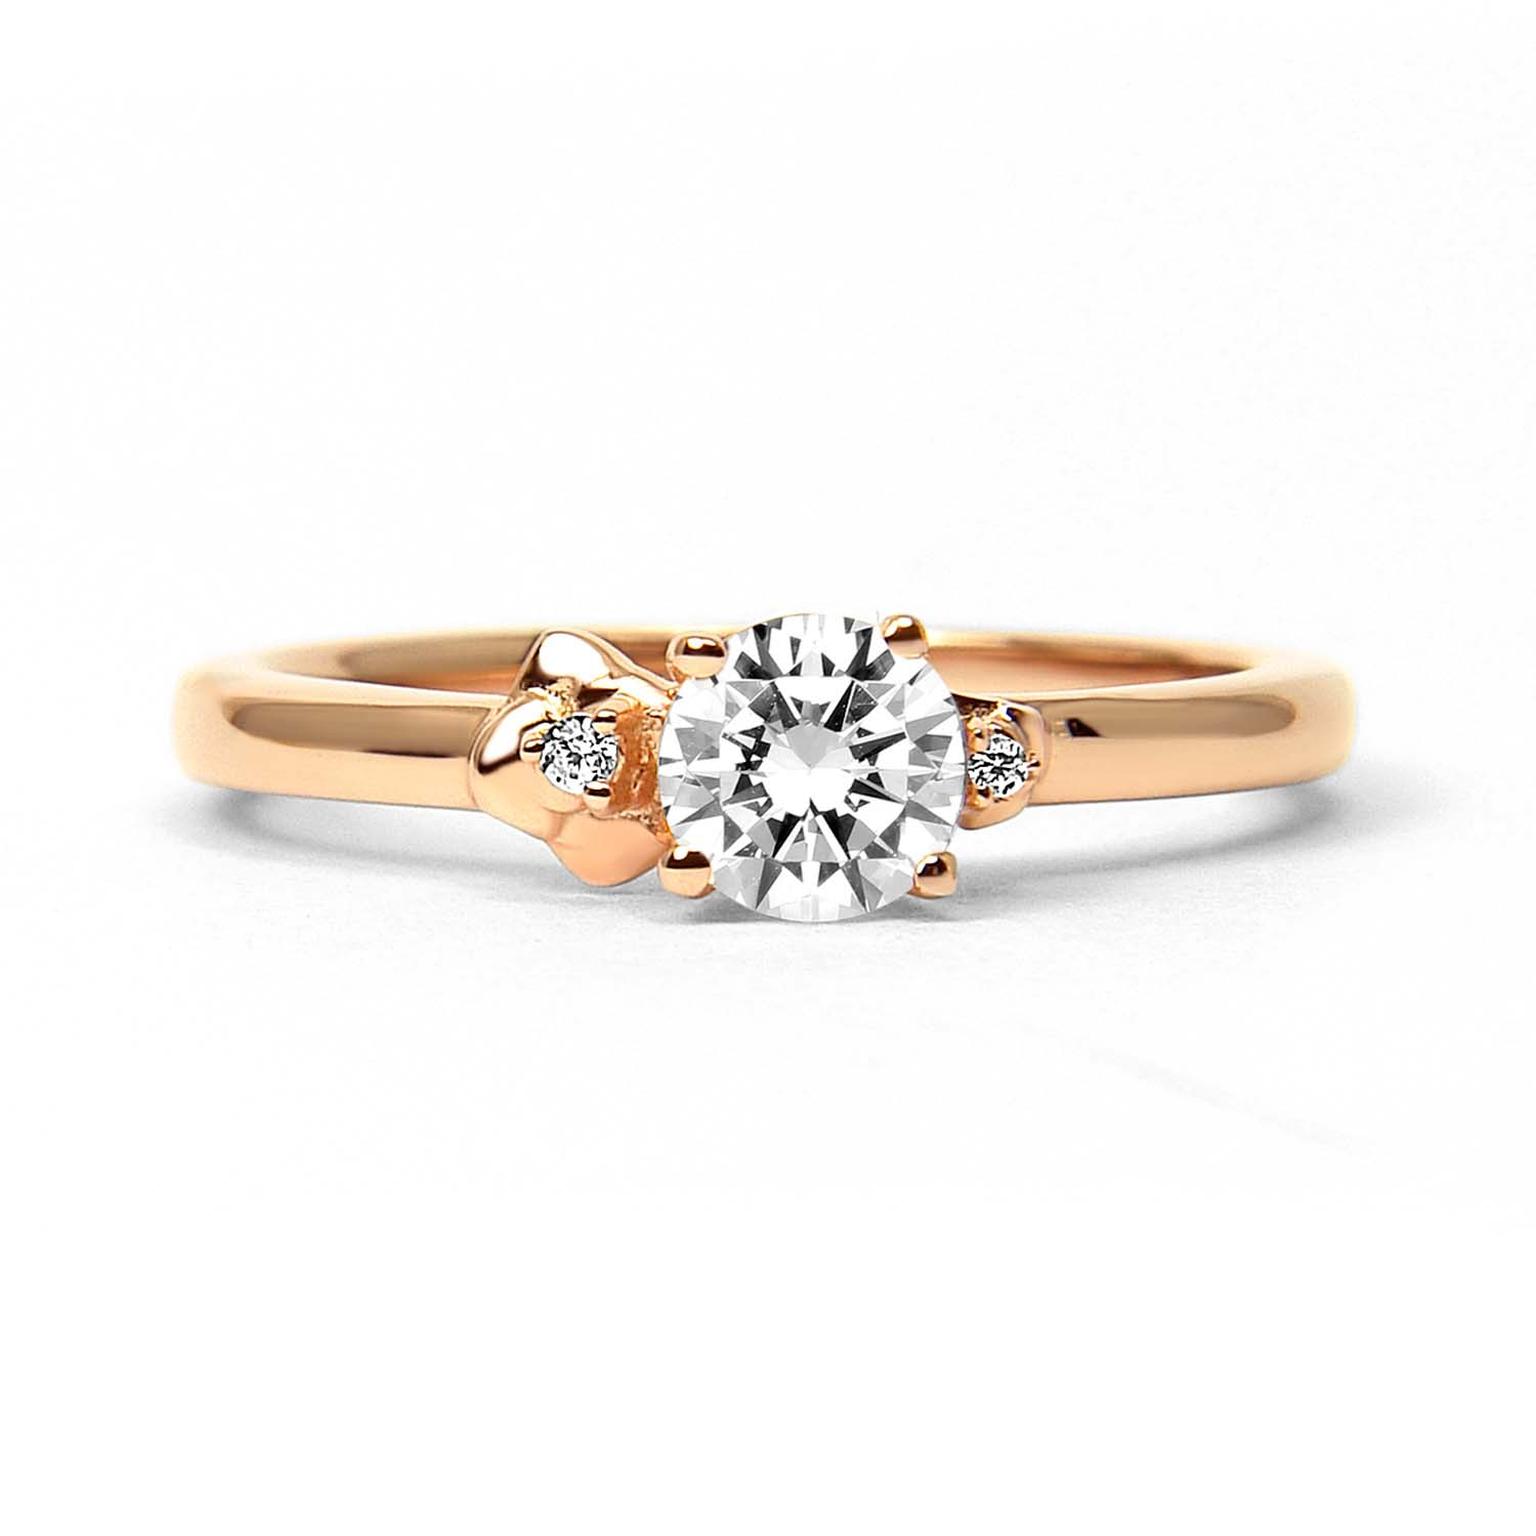 Arabel Lebrusan Cherry Blossom ethical diamond engagement ring in Fairtrade rose gold (from £2,145). From the Secret Garden collection.